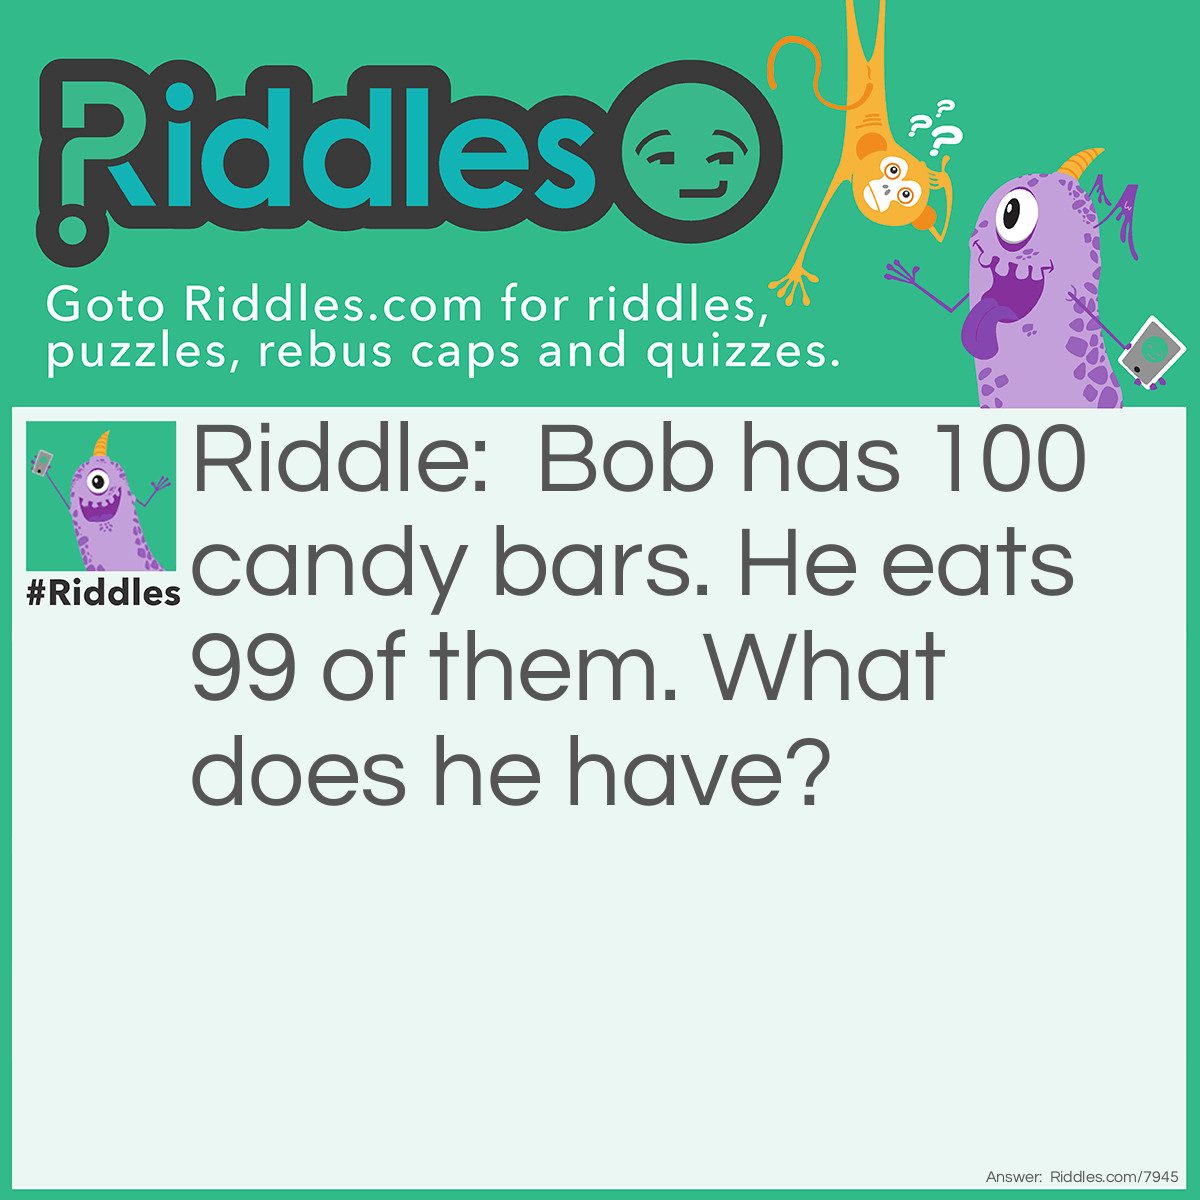 Riddle: Bob has 100 candy bars. He eats 99 of them. What does he have? Answer: Diarrhea.